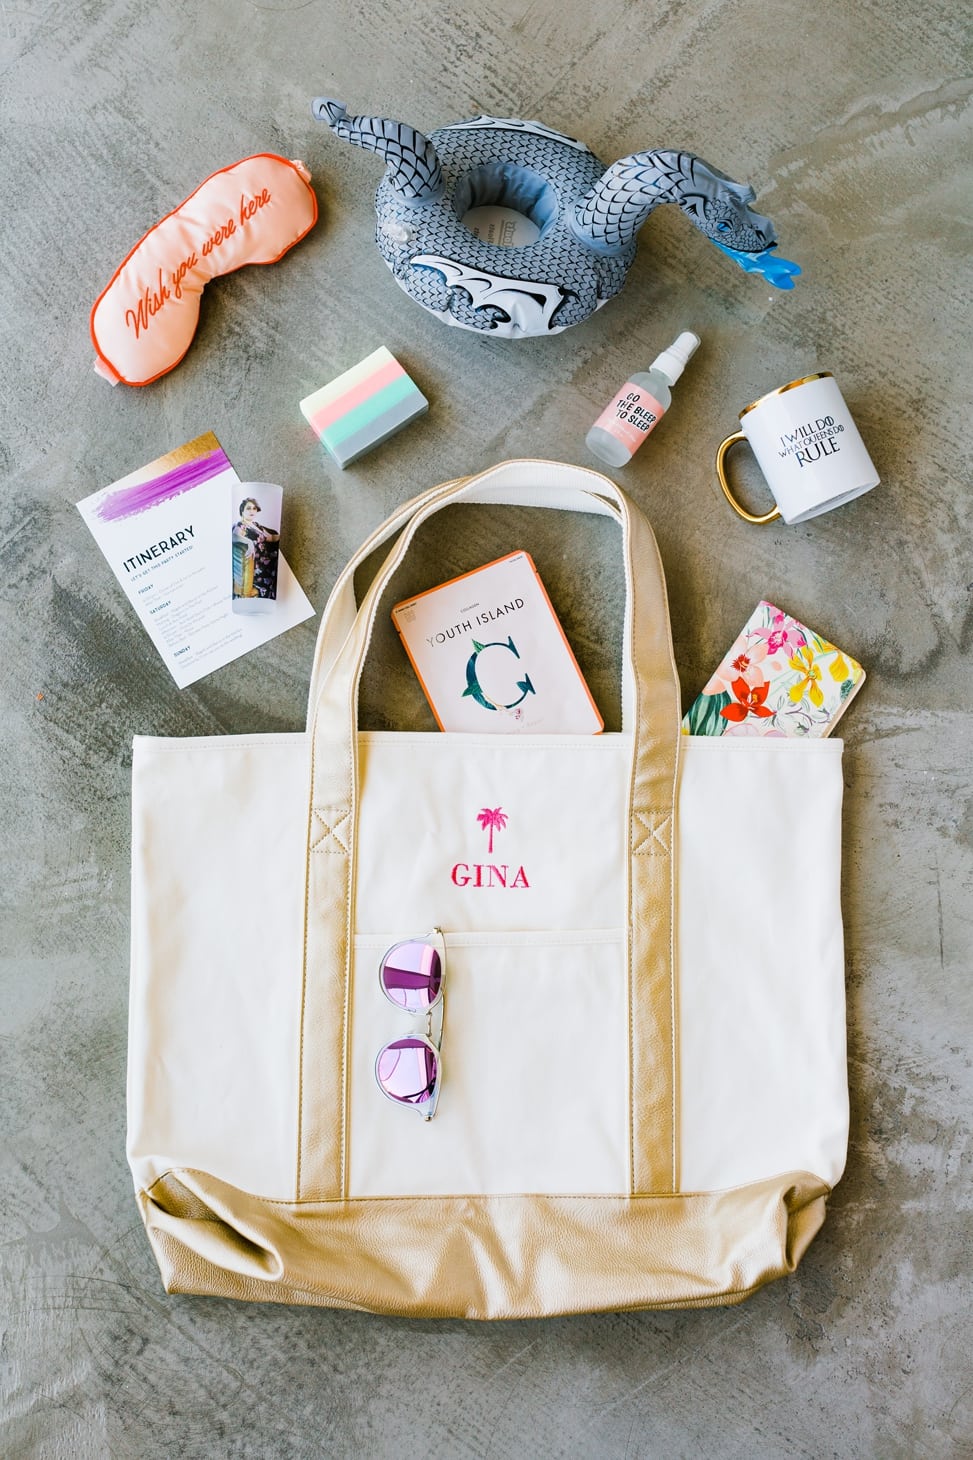 a personalized embroidered tote bag that has a palmtree and reads "Gina" in pink, with sunglasses, a dragon cupholder pool floaty, a sleep mask that reads "Wish you were here," a gold trimmed mug, and other items